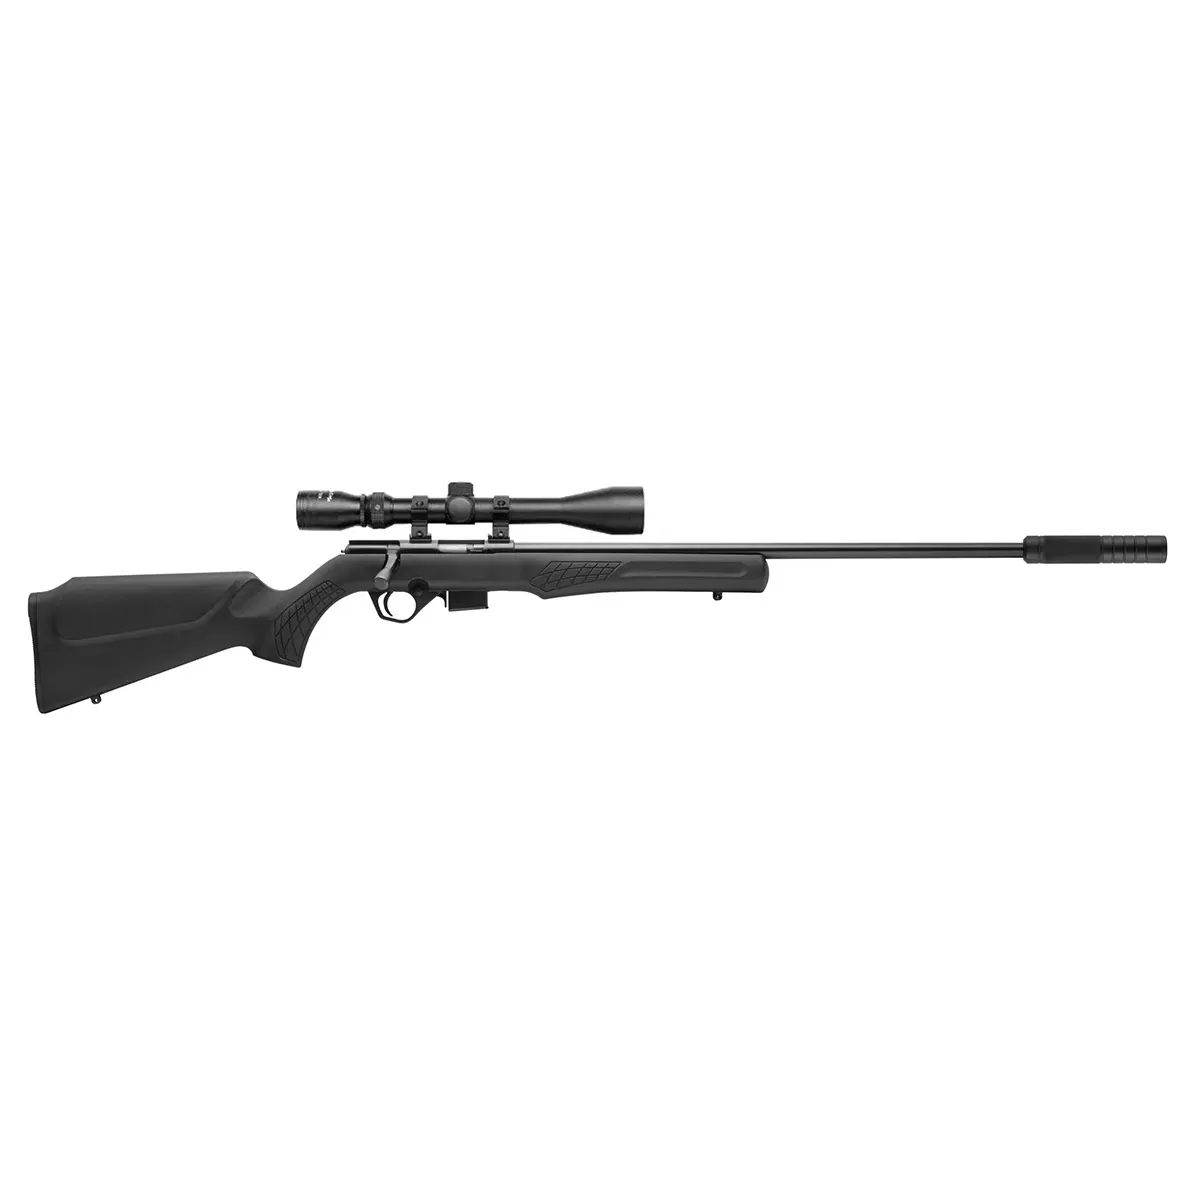 Rossi 8122 22WMR Bolt Action Package - includes 3-9X40 Scope & Suppressor